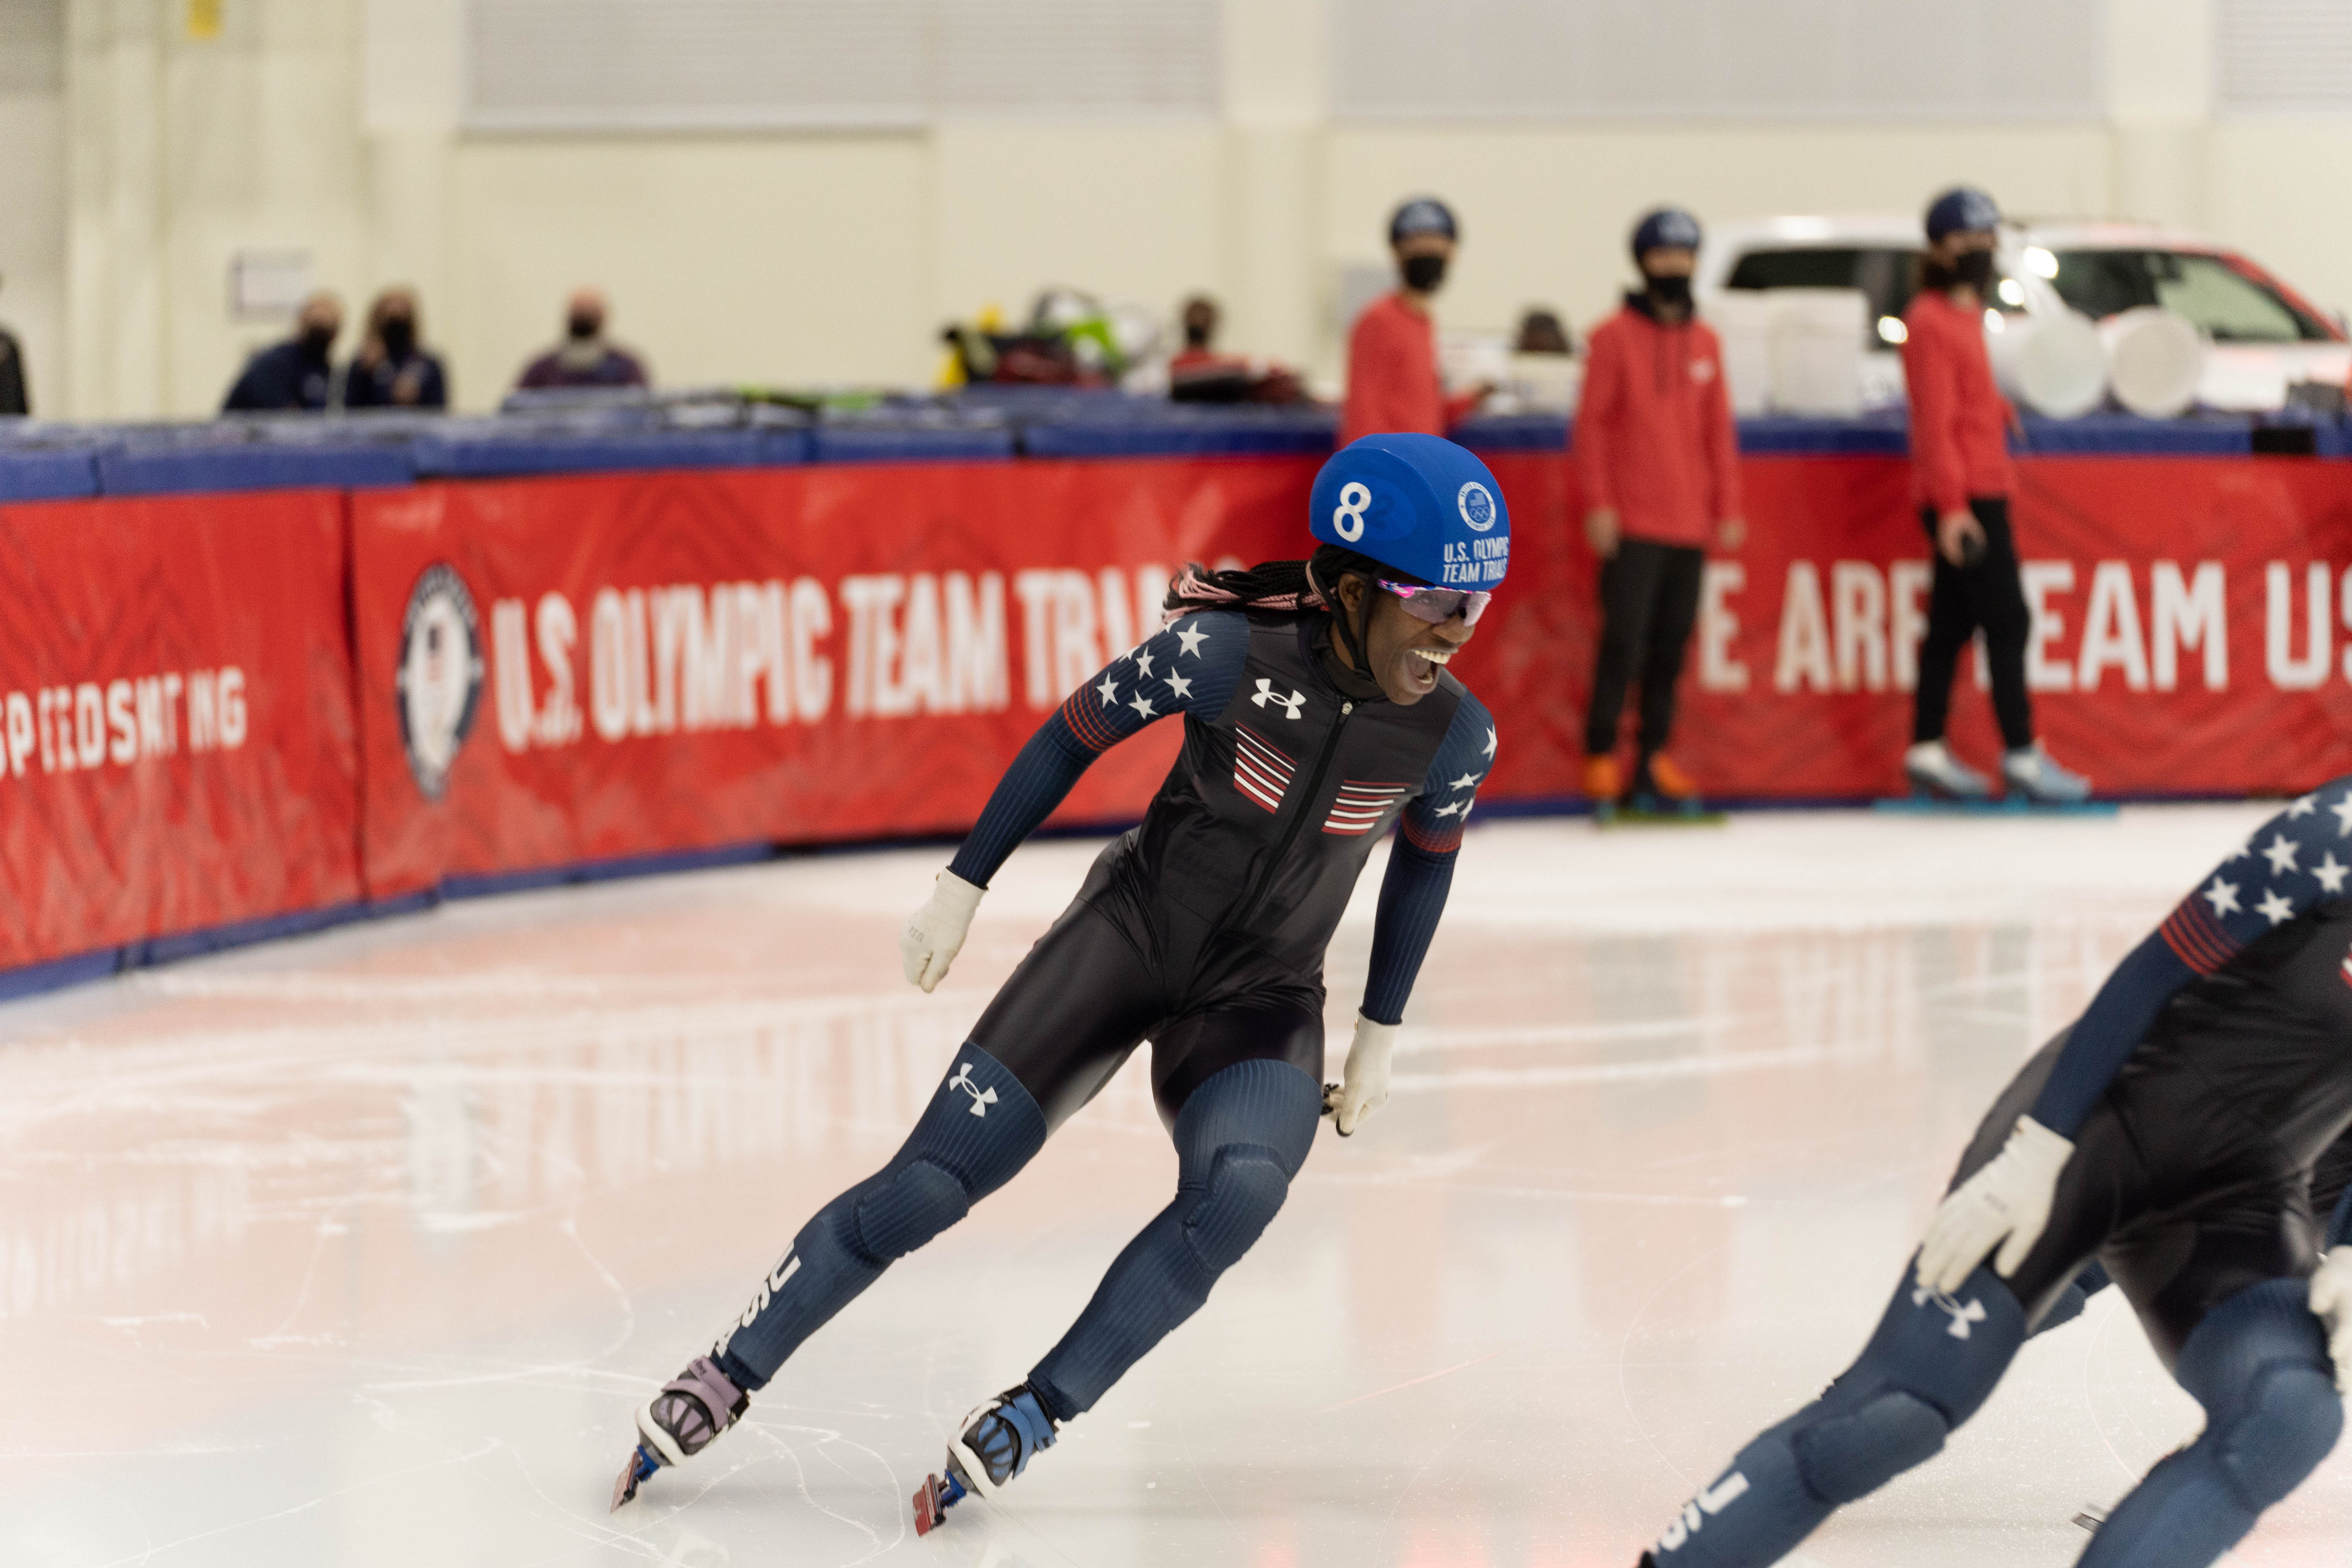 Maame Biney, South Lakes High graduate, will make her second Winter Olympics appearance on the U.S. Women's speed skating team. Photo Credit: U.S. Speedskating.